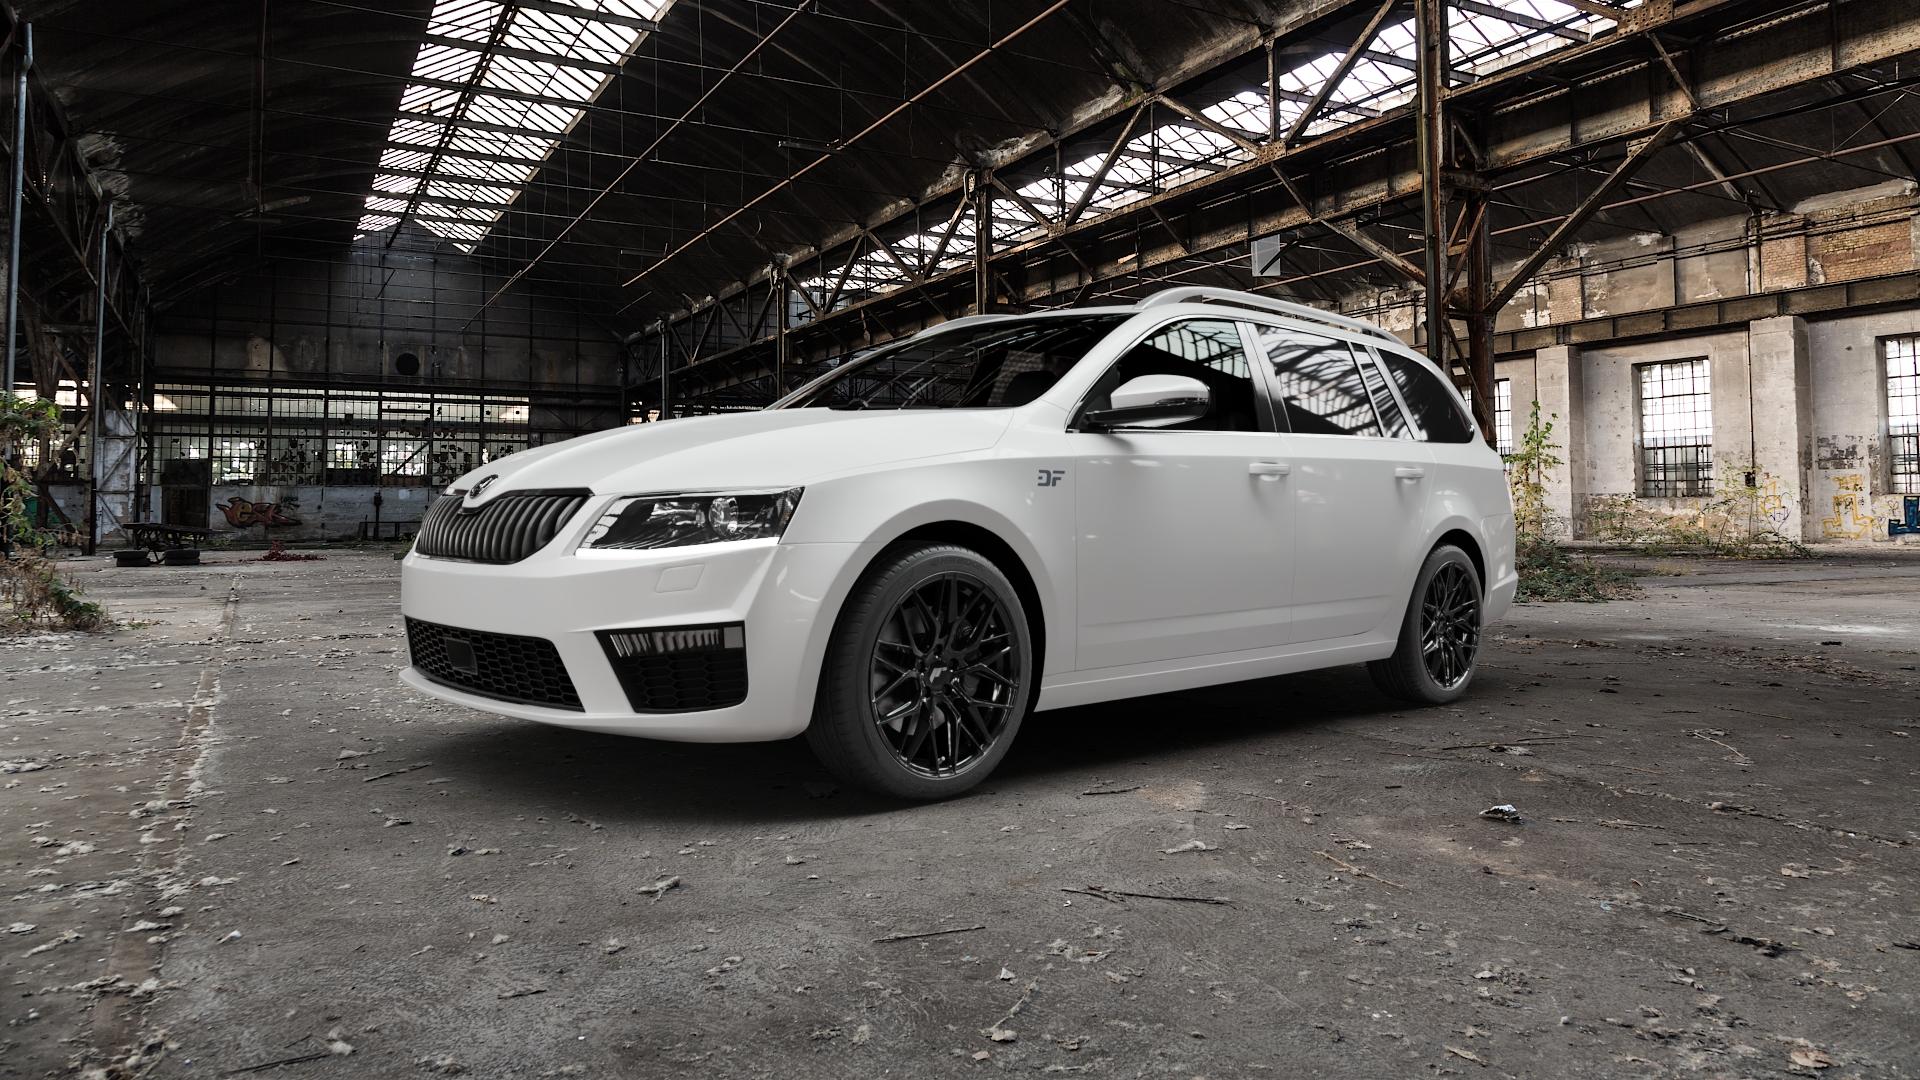 Skoda Octavia III Kombi Type 5E Facelift 2,0l TDI 135kW RS 4x4 (184 hp)  Wheels and Tyre Packages